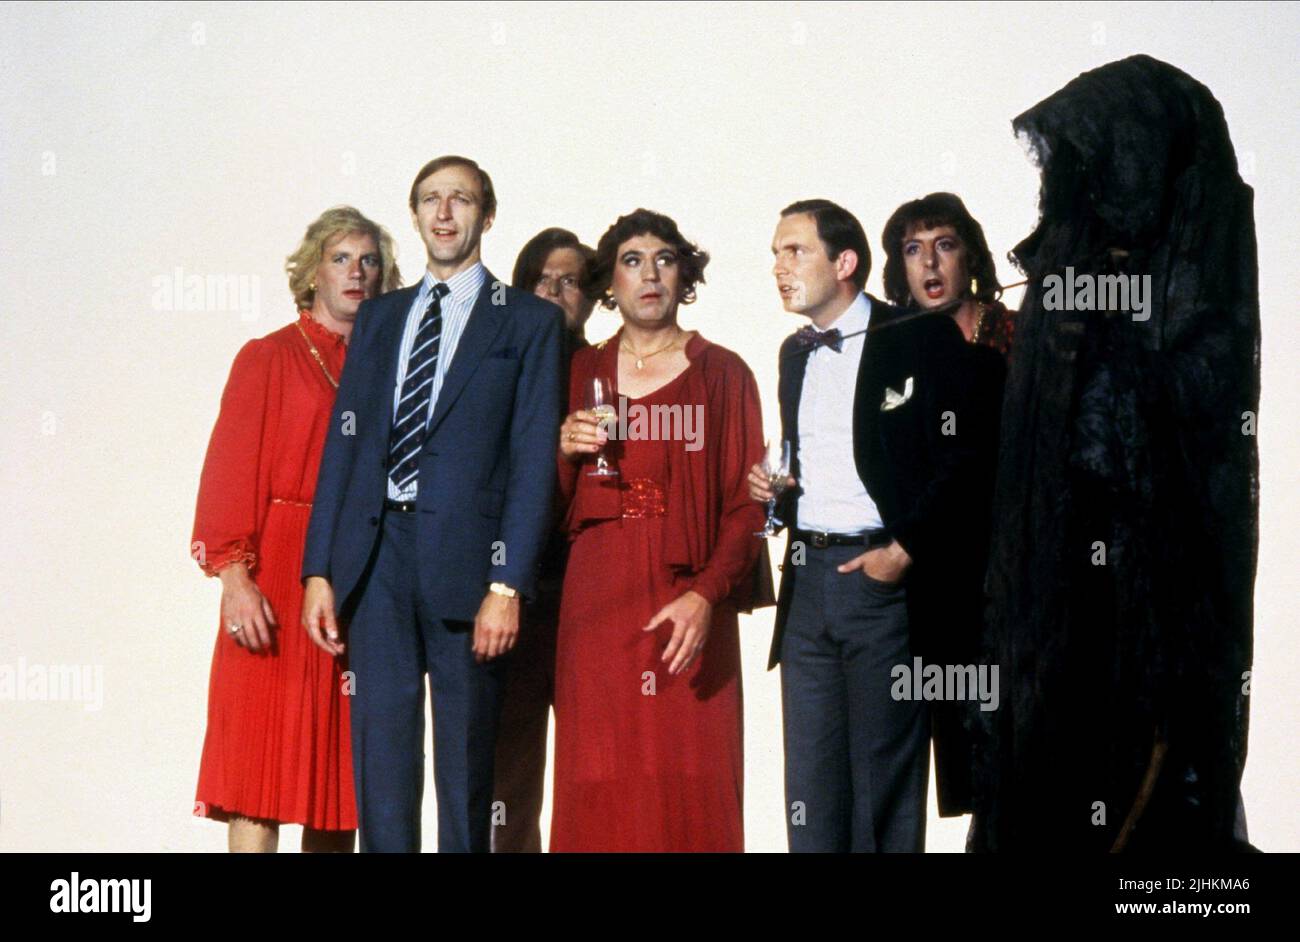 MICHAEL PALIN, GRAHAM CHAPMAN, TERRY GILLIAM, TERRY JONES, ERIC IDLE, MONTY PYTHON'S THE MEANING OF LIFE, 1983 Stock Photo